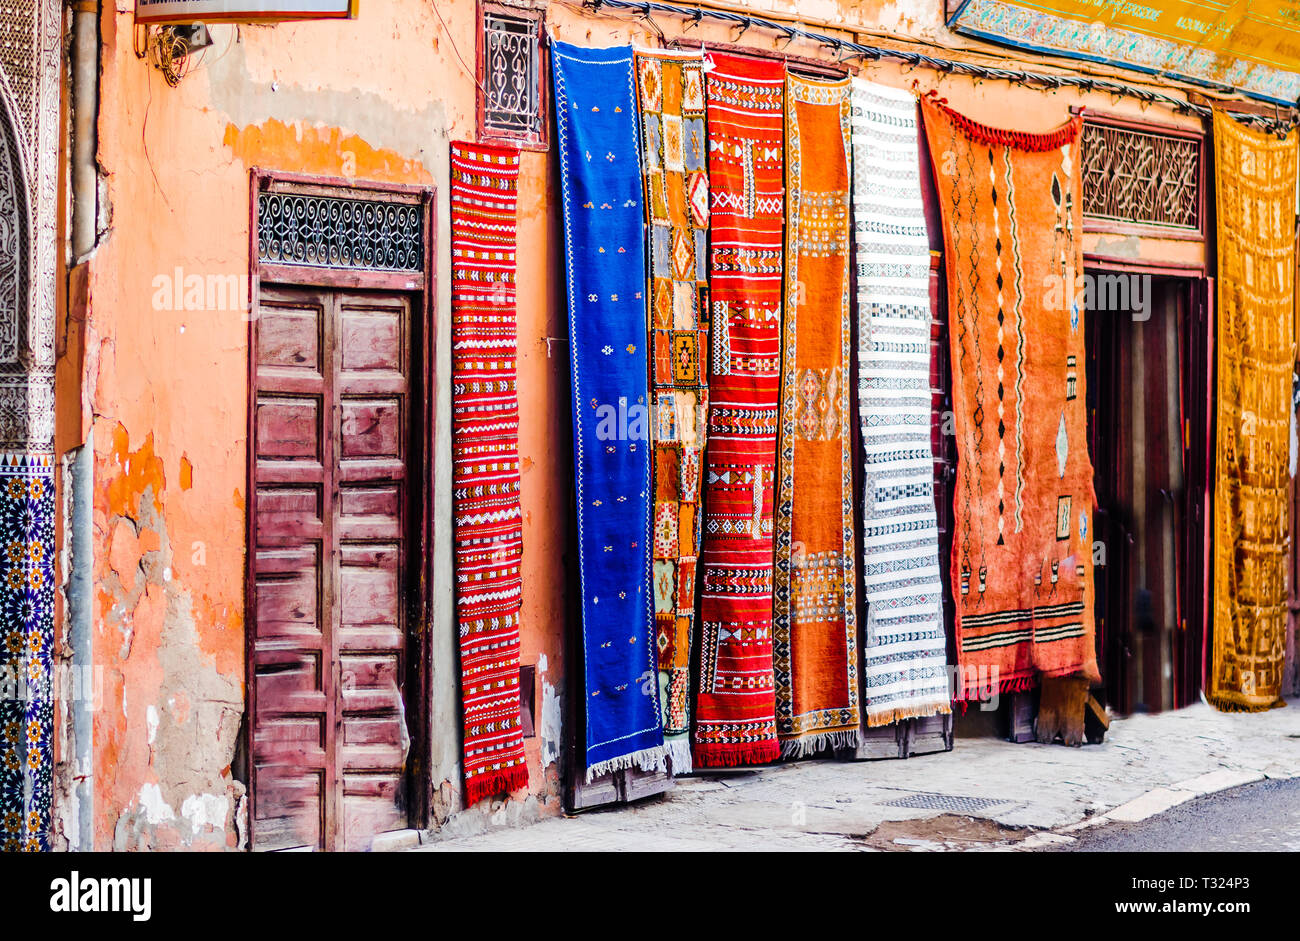 View on Berber Carpets in Souk of Marrakech Stock Photo